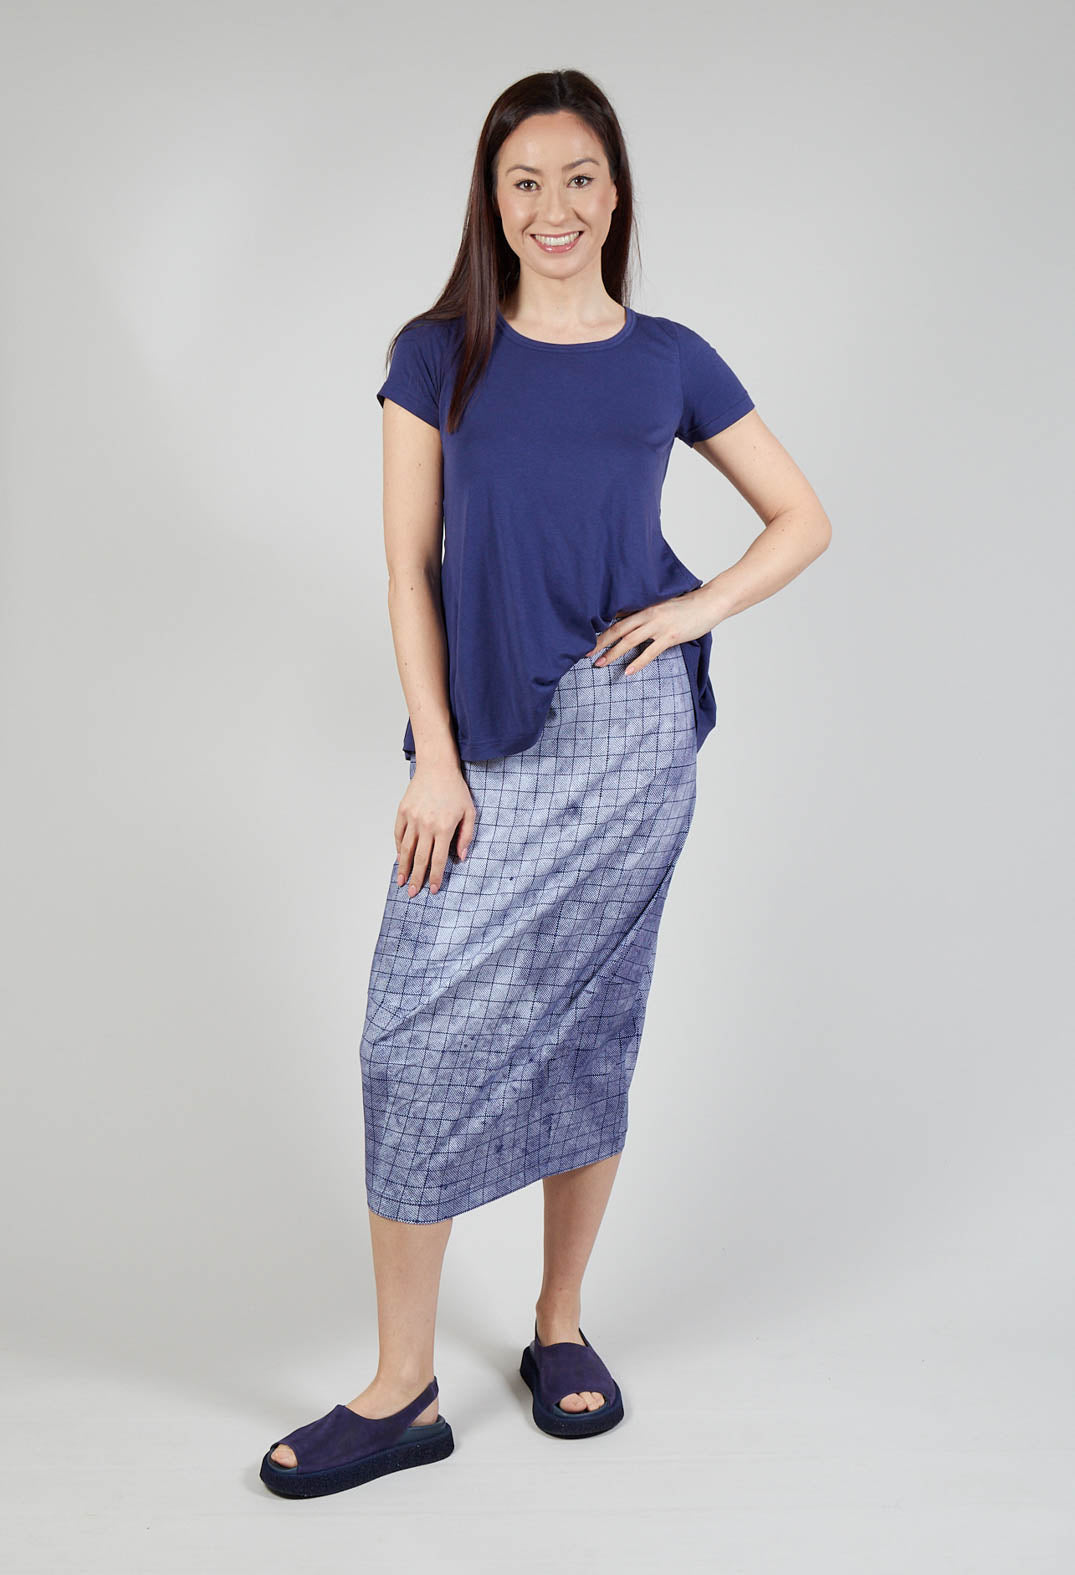 Pull On Fitted Skirt in Azur Print